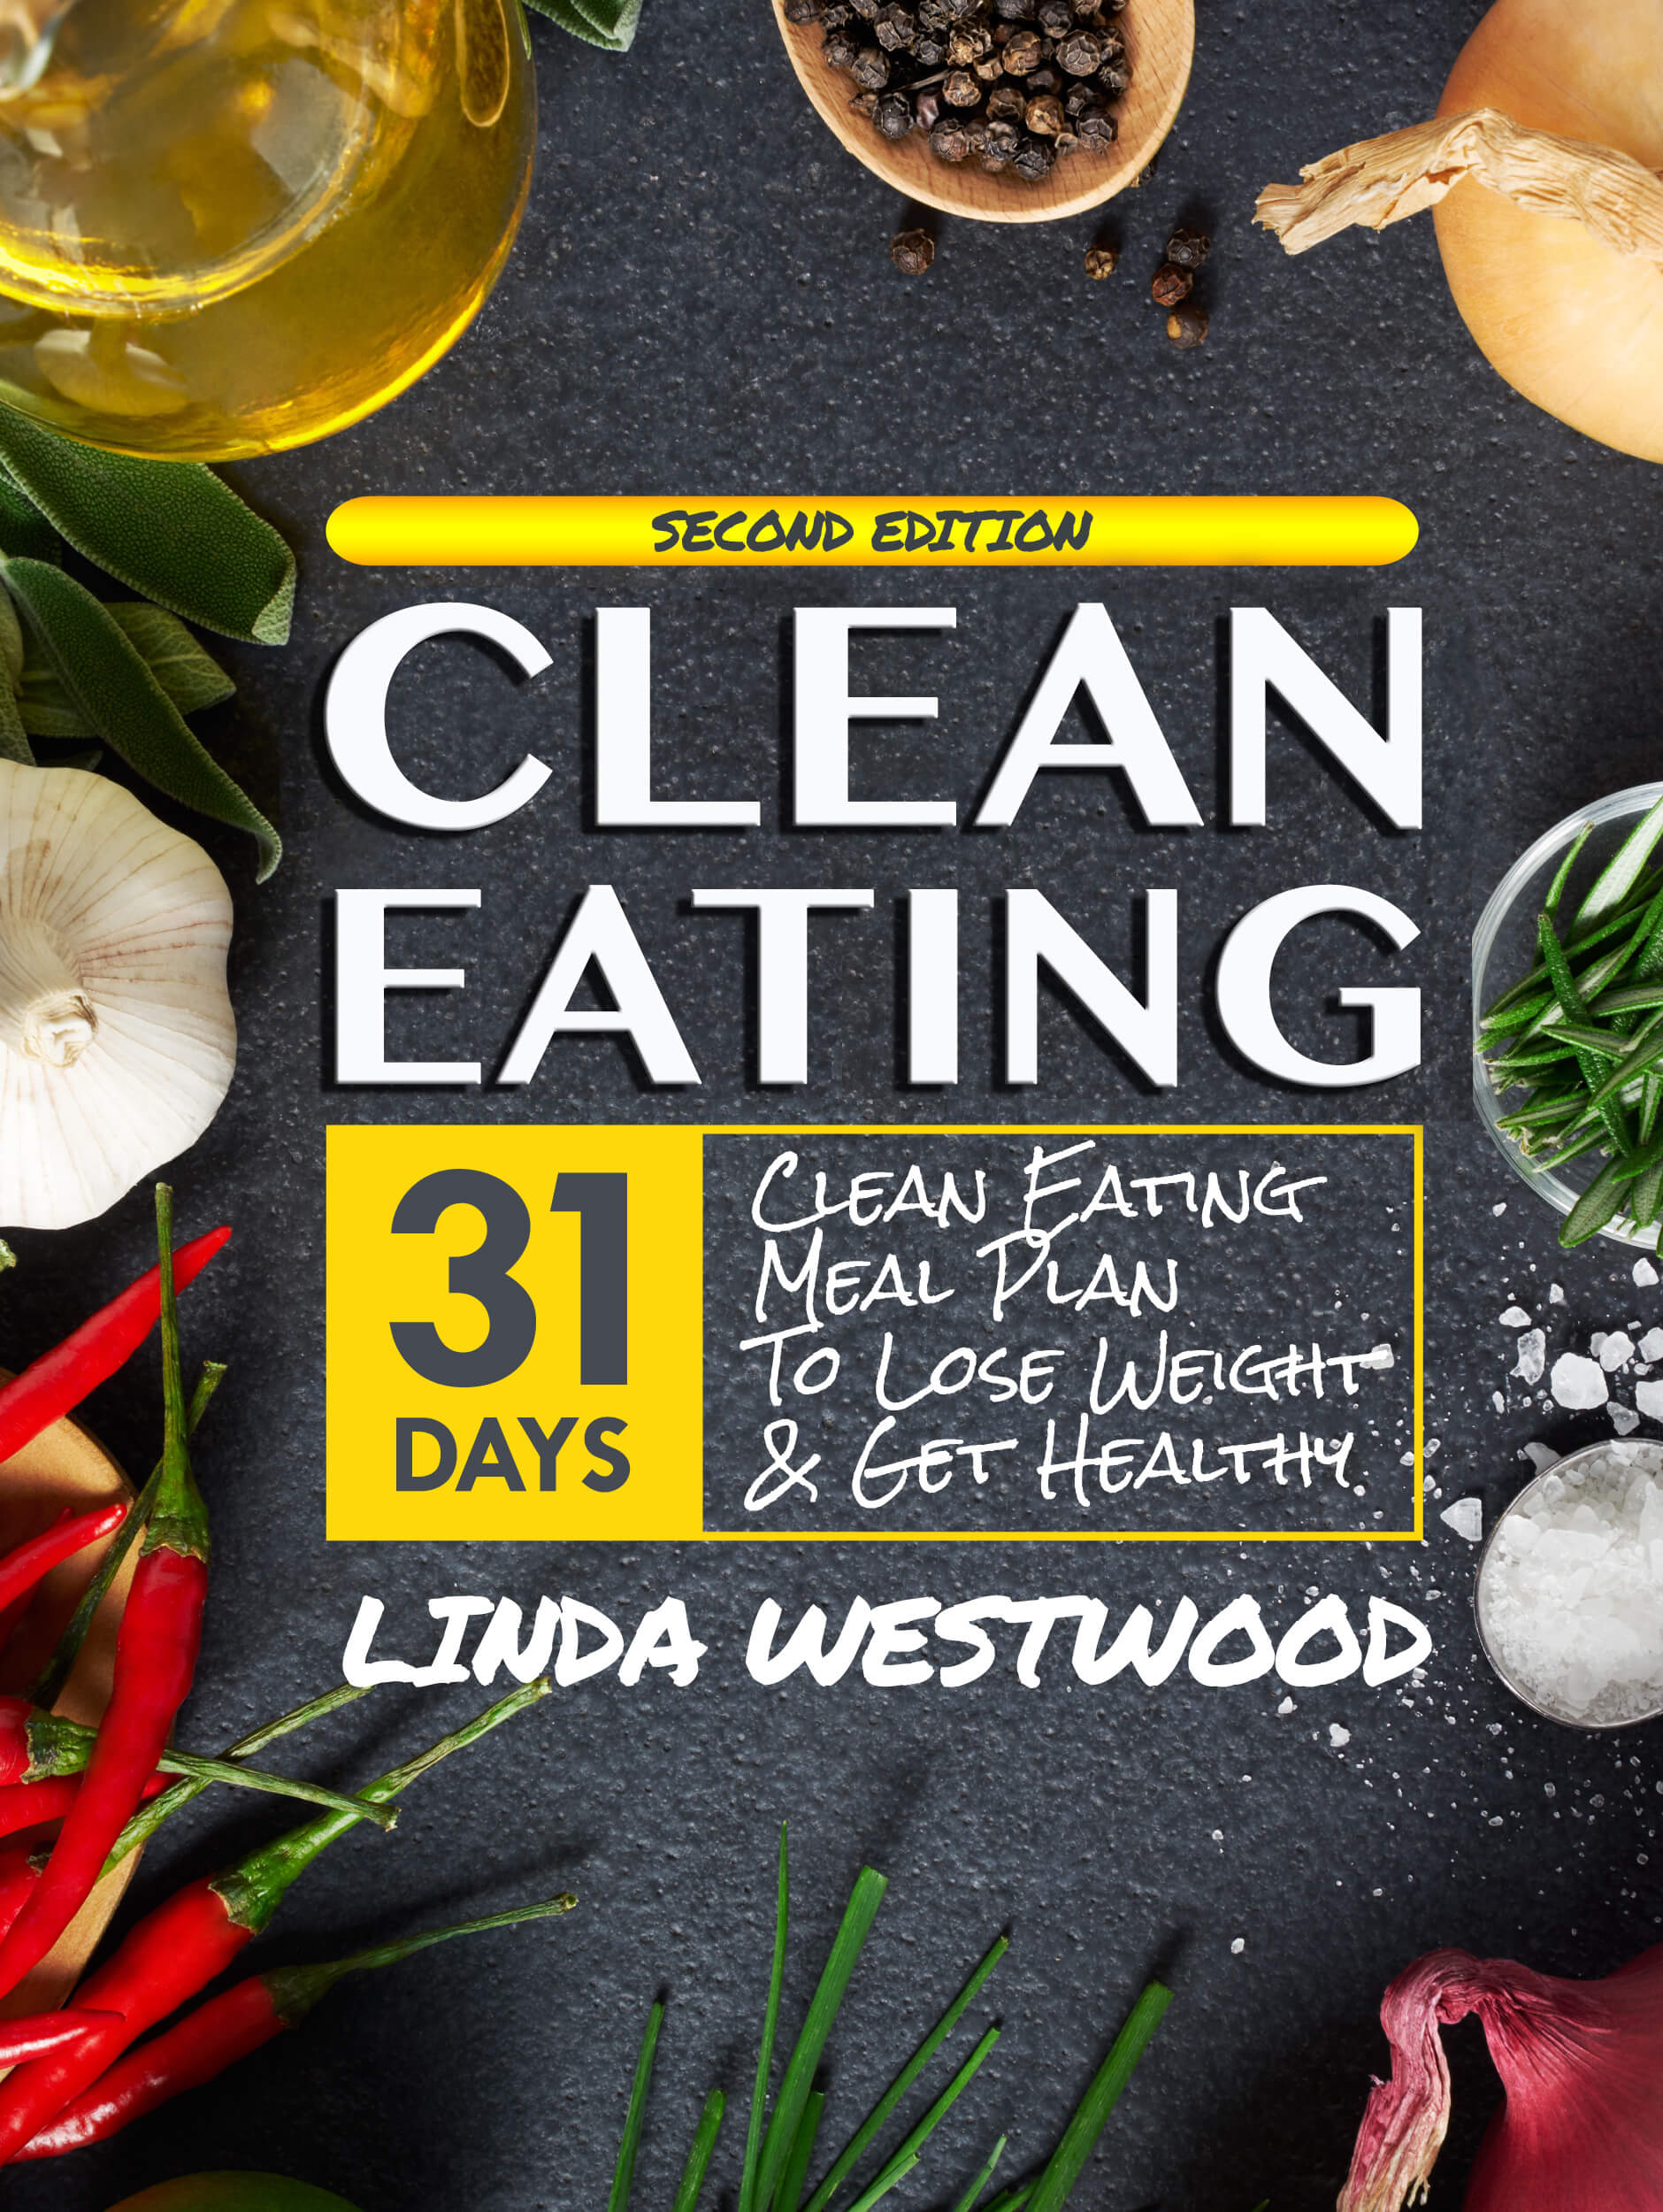 FREE: Clean Eating (4th Edition): 31-Day Clean Eating Meal Plan to Lose Weight & Get Healthy! by Linda Westwood